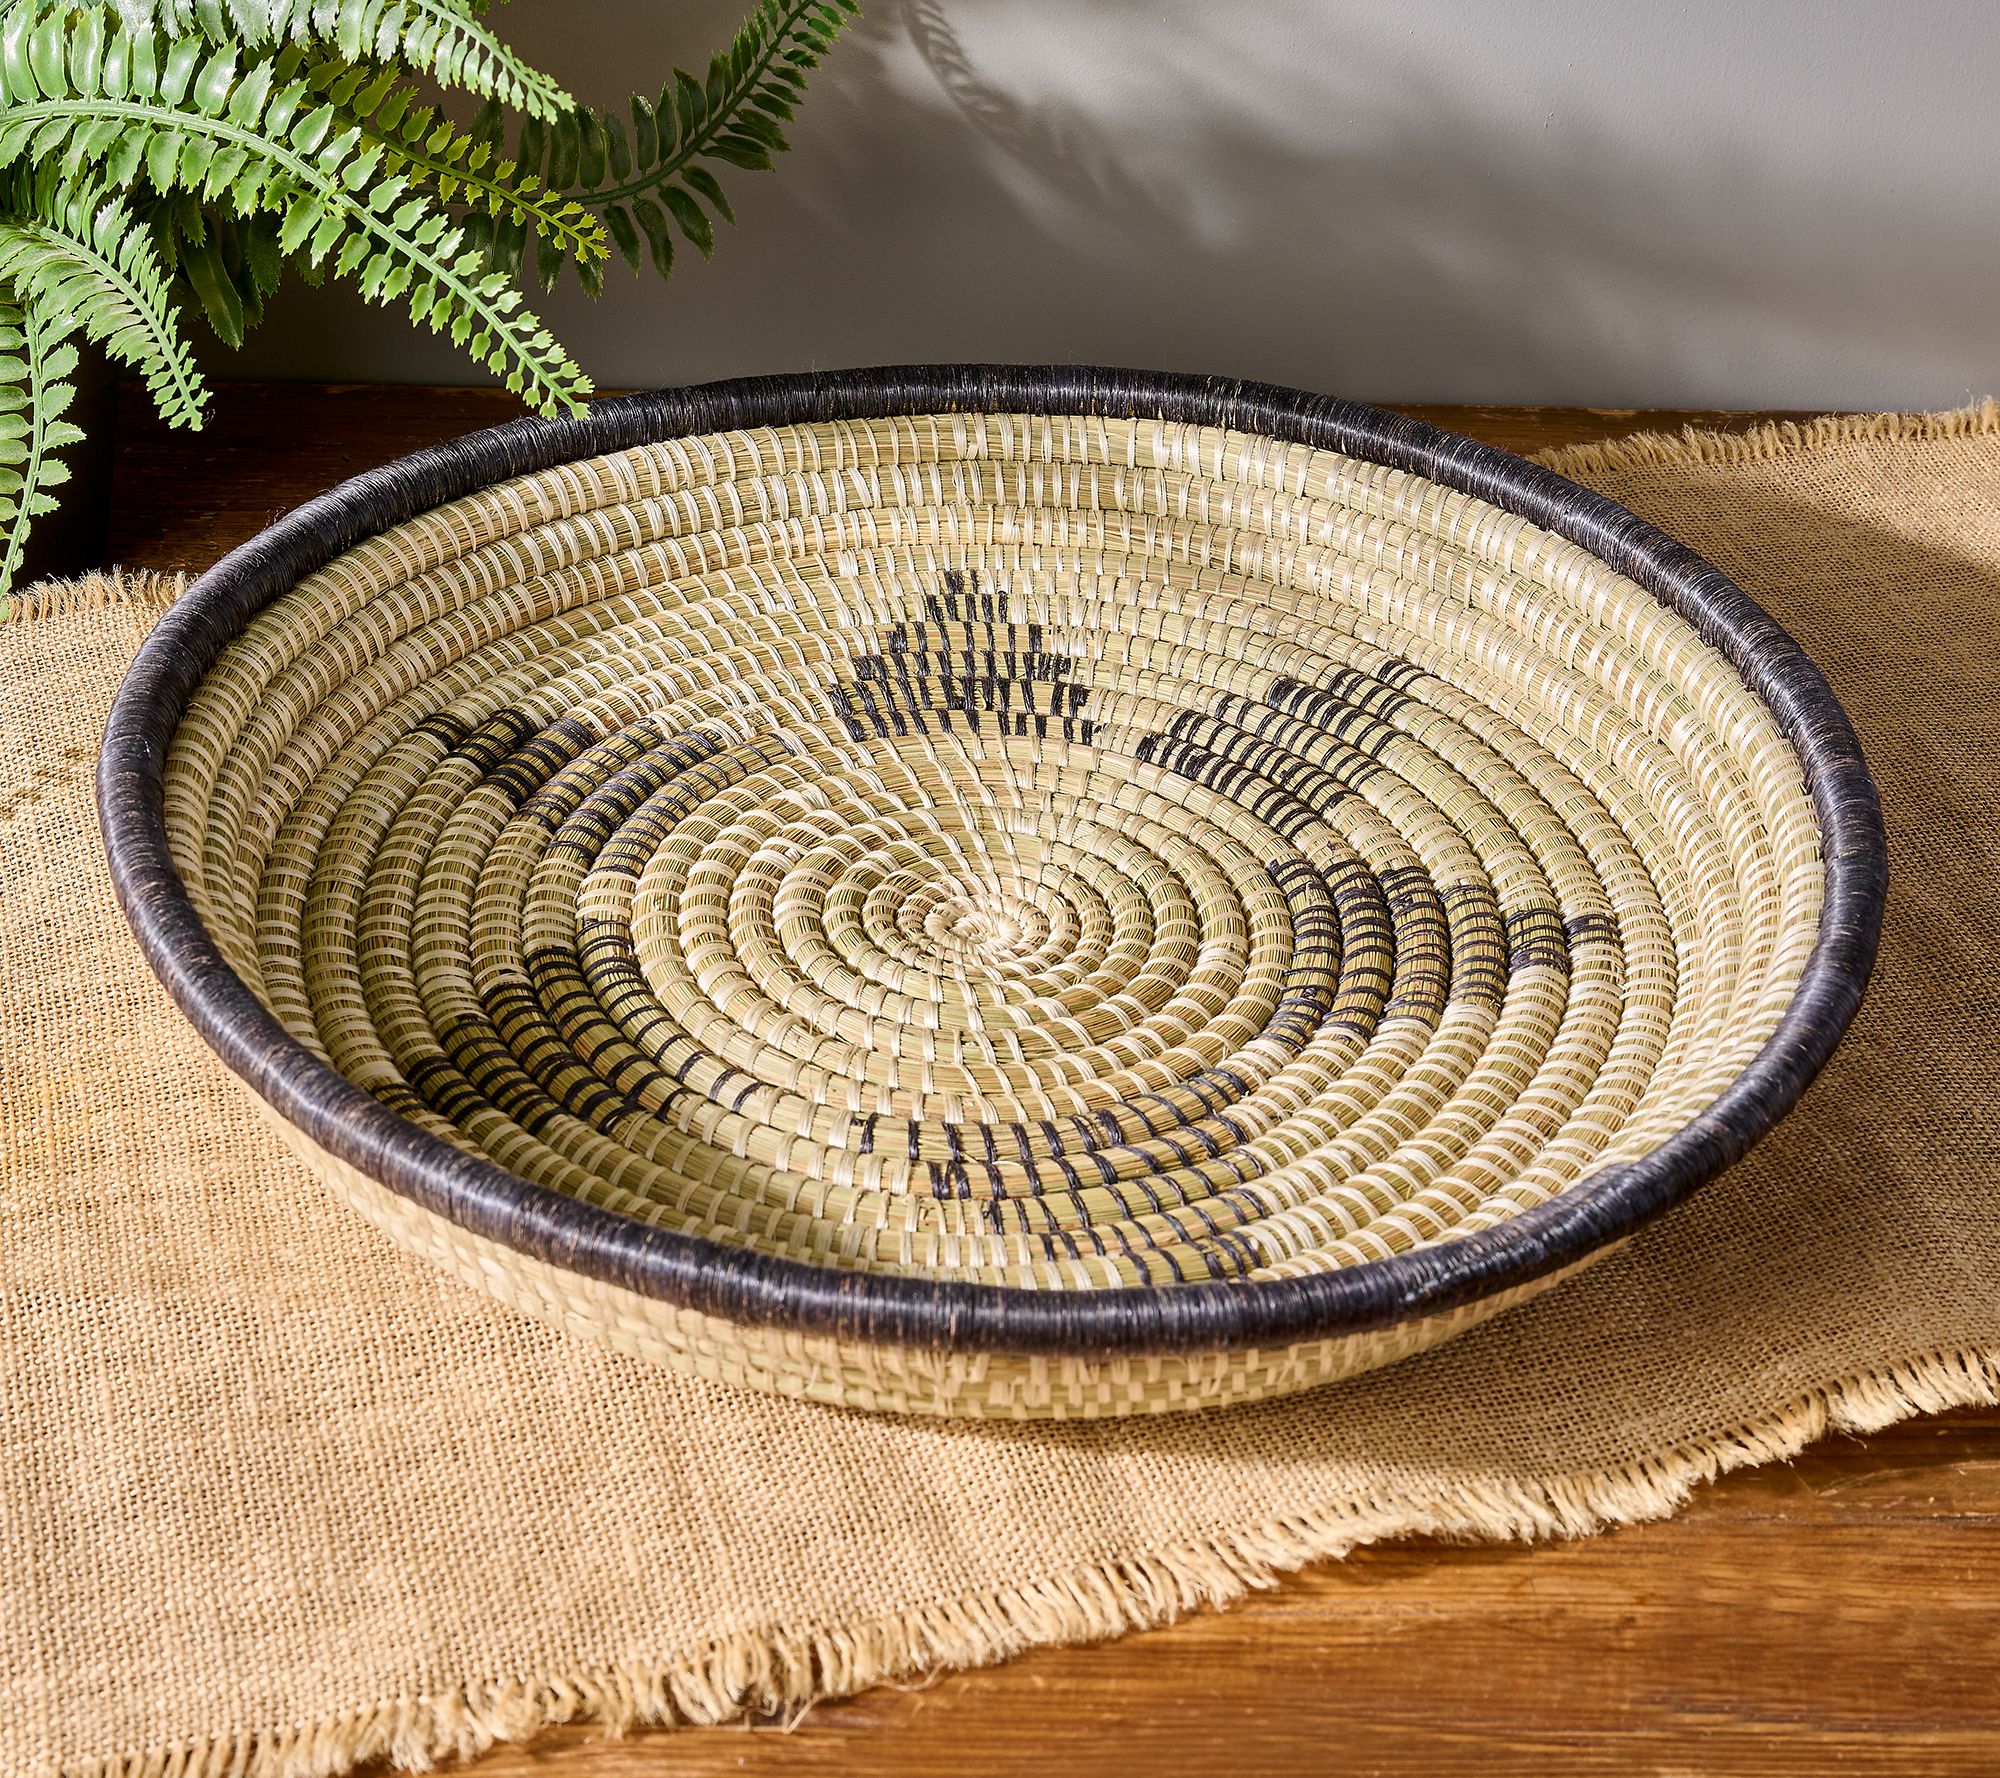 Set of 4 or 5 Vintage Woven Raffia Insulated Bowls in Assorted Colors Price  is for One Set, Two Sets May Be Available 